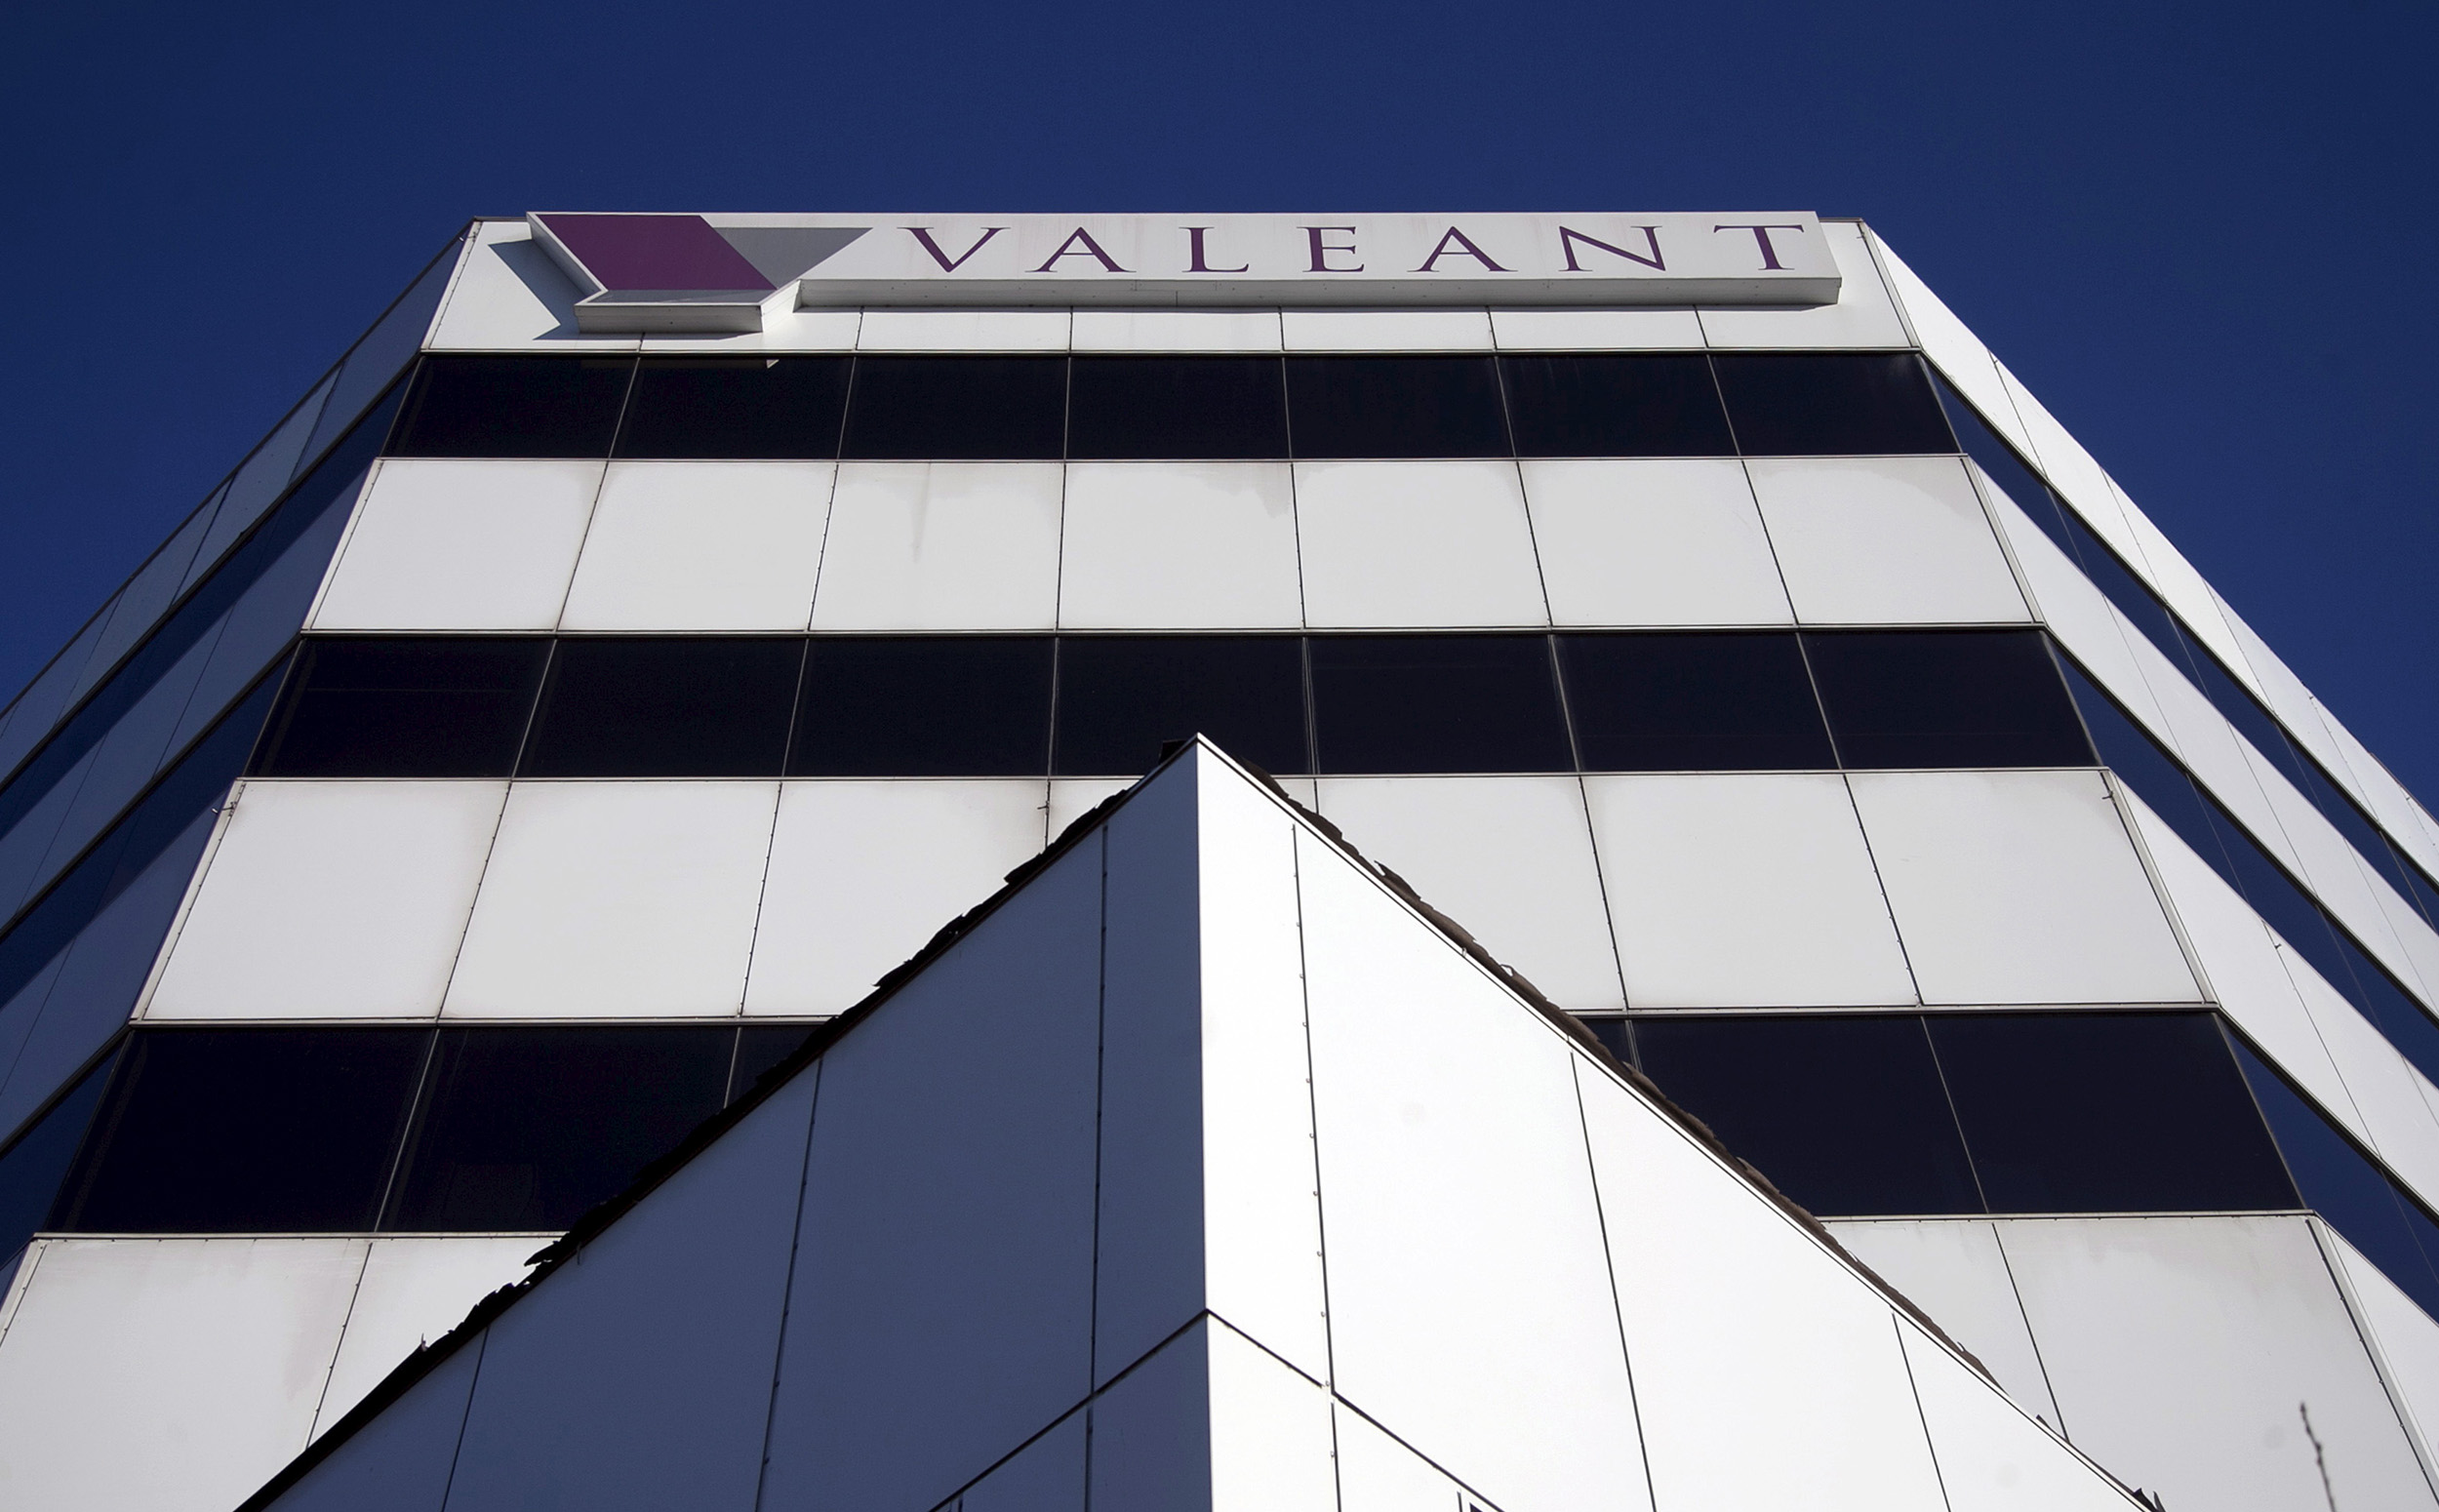 The headquarters of Valeant Pharmaceuticals International Inc., seen in Laval, Quebec on Nov. 9 2015. (Christinne Muschi—Reuters)